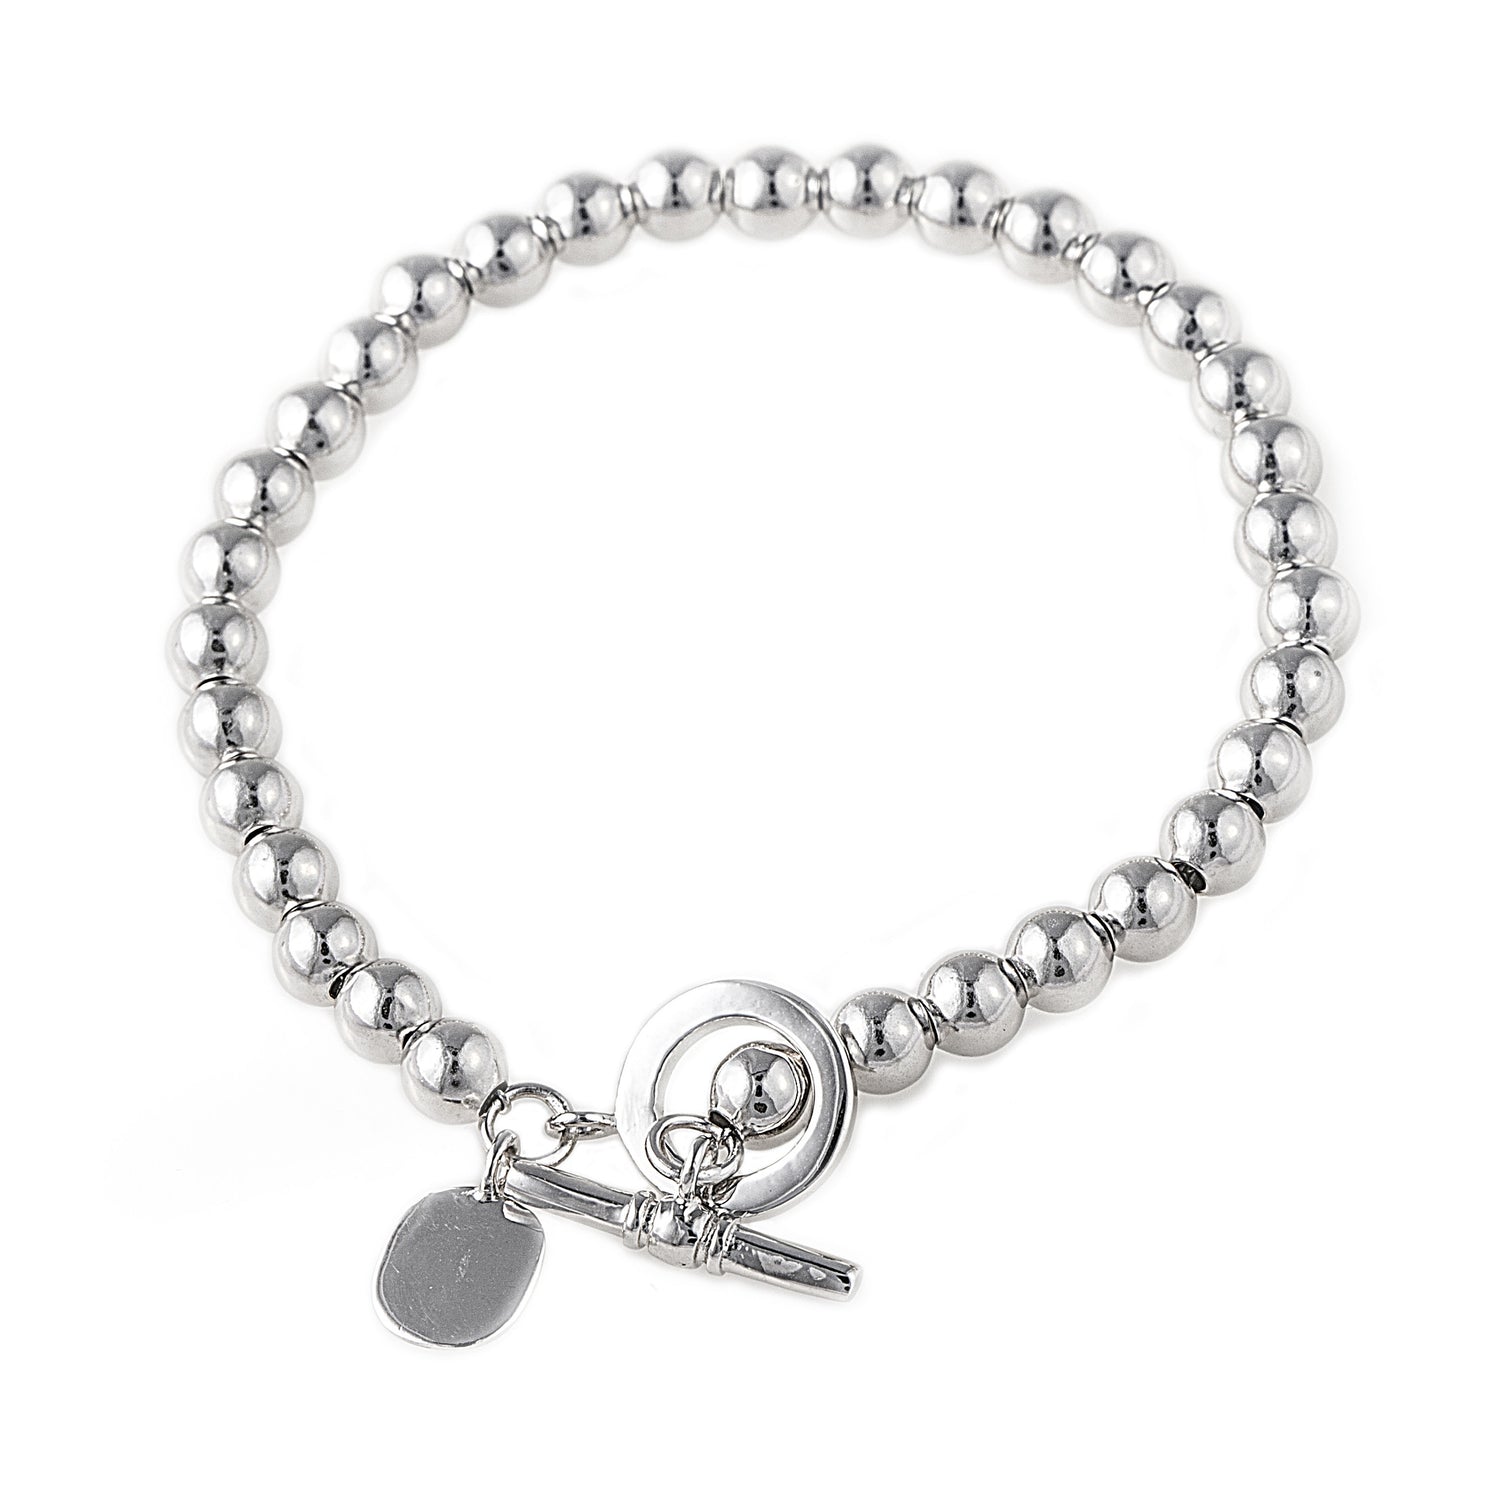 Peace Bracelet in 925 sterling silver with toggle clasp and charm. Worldwide Shipping from Australia. Affordable luxury jewellery by Bellagio & Co.